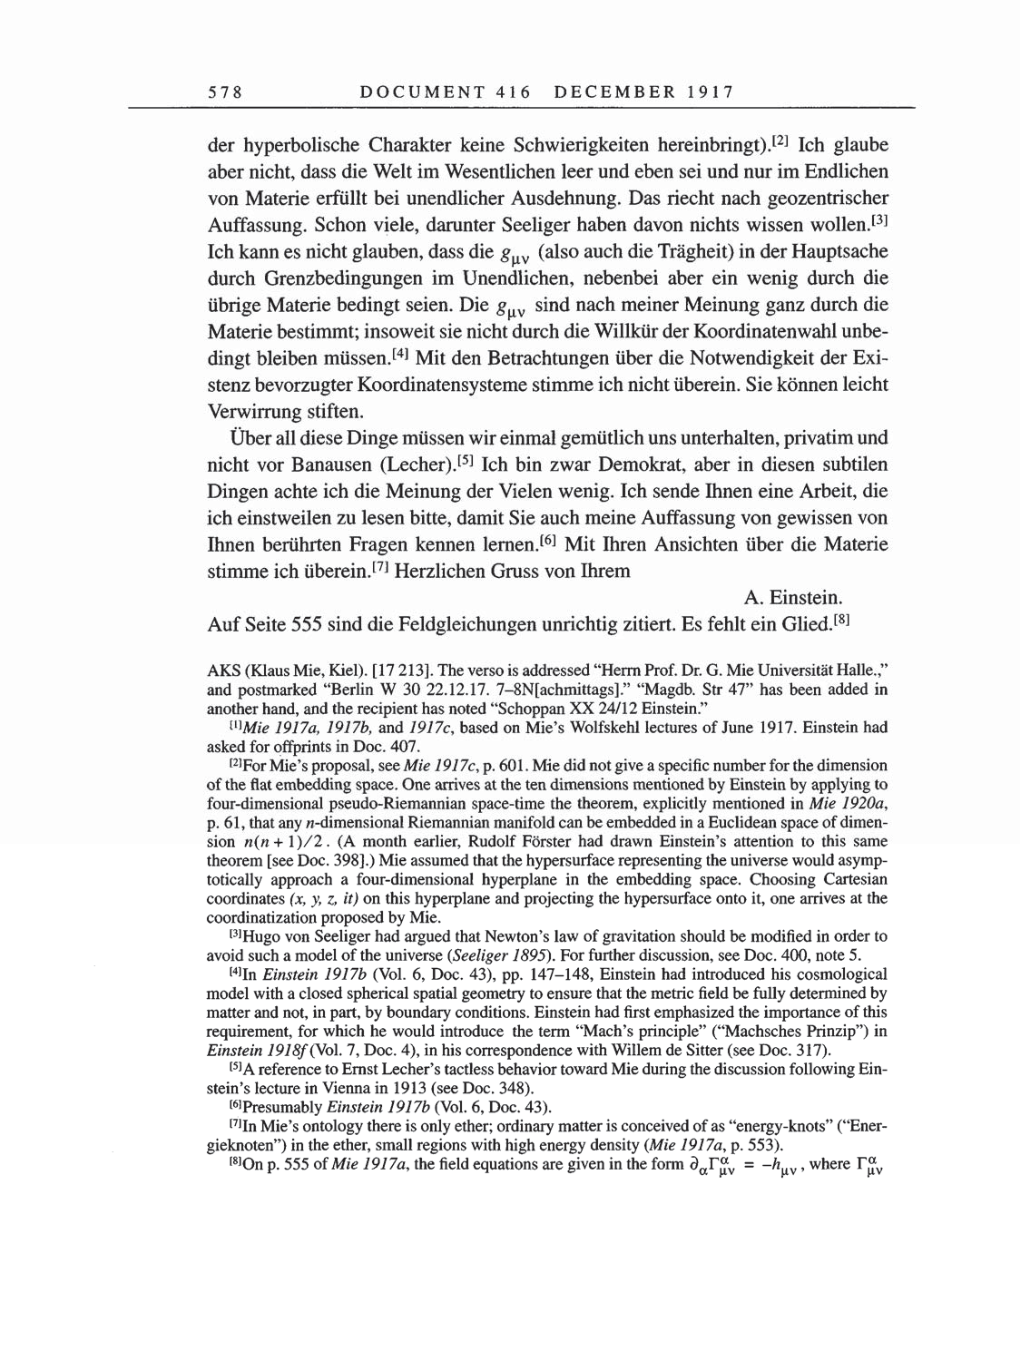 Volume 8, Part A: The Berlin Years: Correspondence 1914-1917 page 578